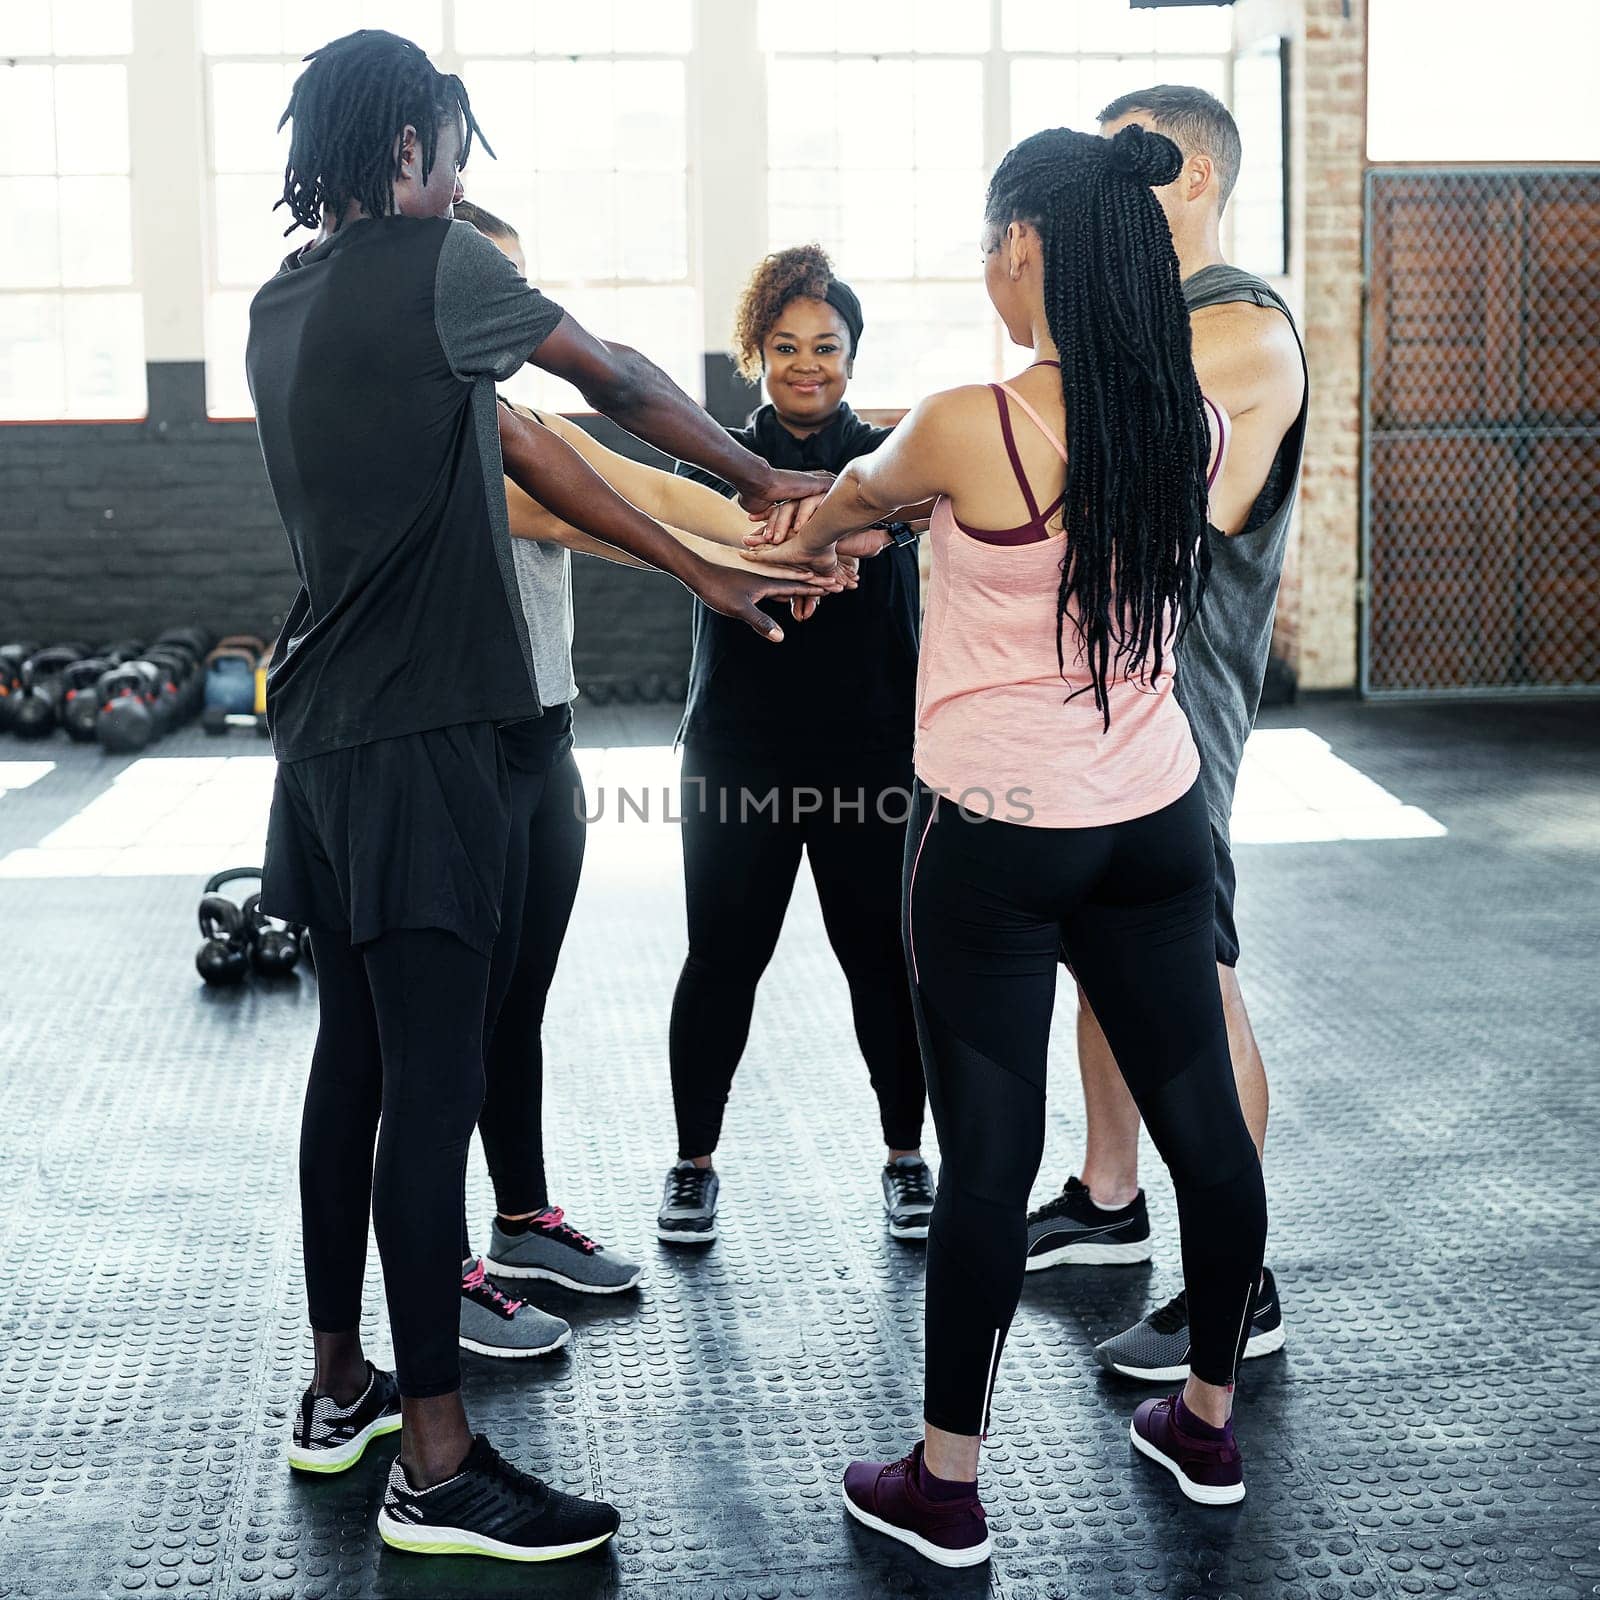 All about that fitness. a cheerful young group of people forming a huddle together while one looks at the camera before a workout session in a gym. by YuriArcurs